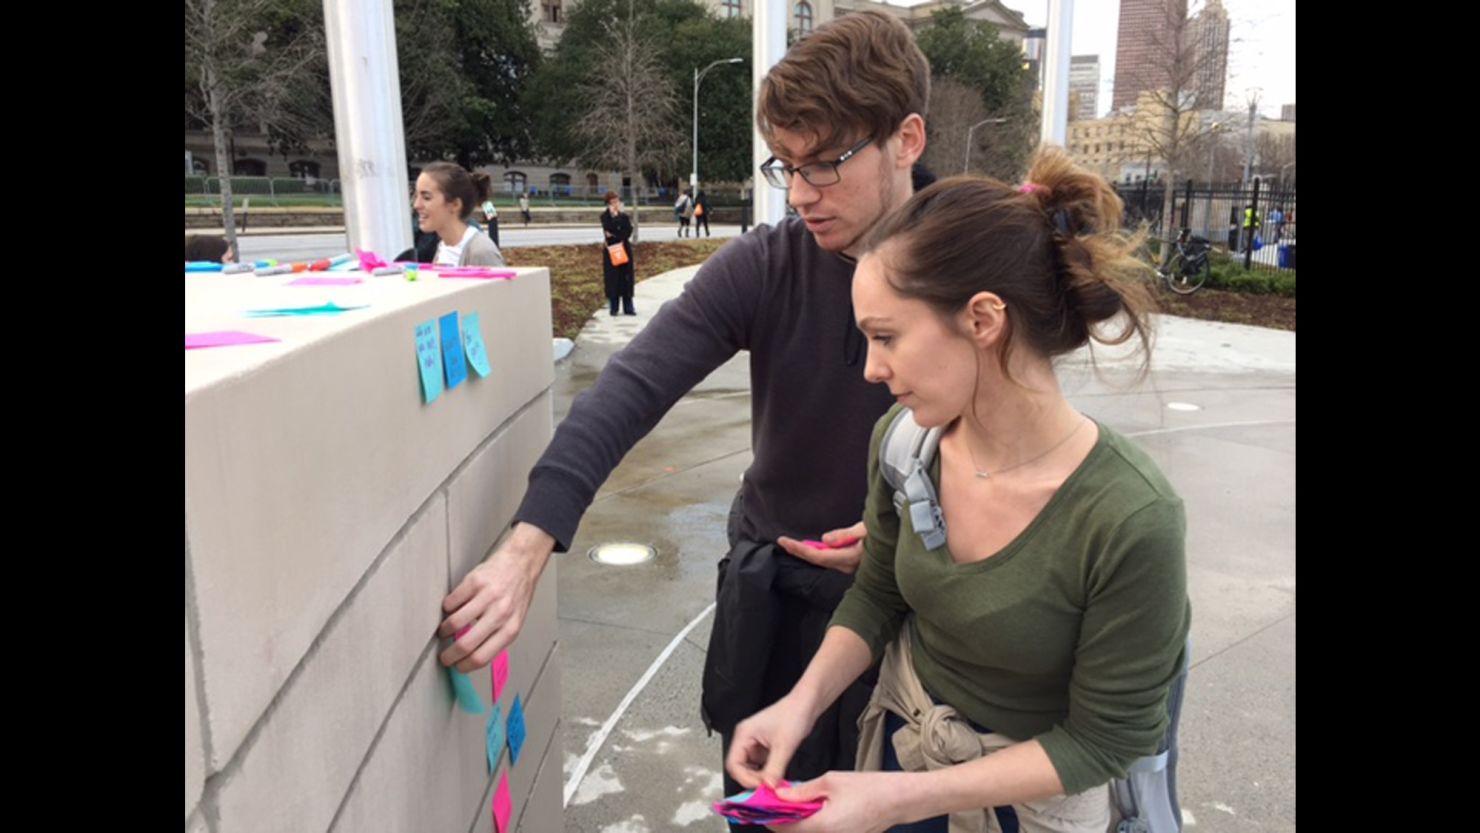 Dylan Stone-Miller and his girlfriend, Andrea McGrath, stand at a wall near the Georgia state Capitol.